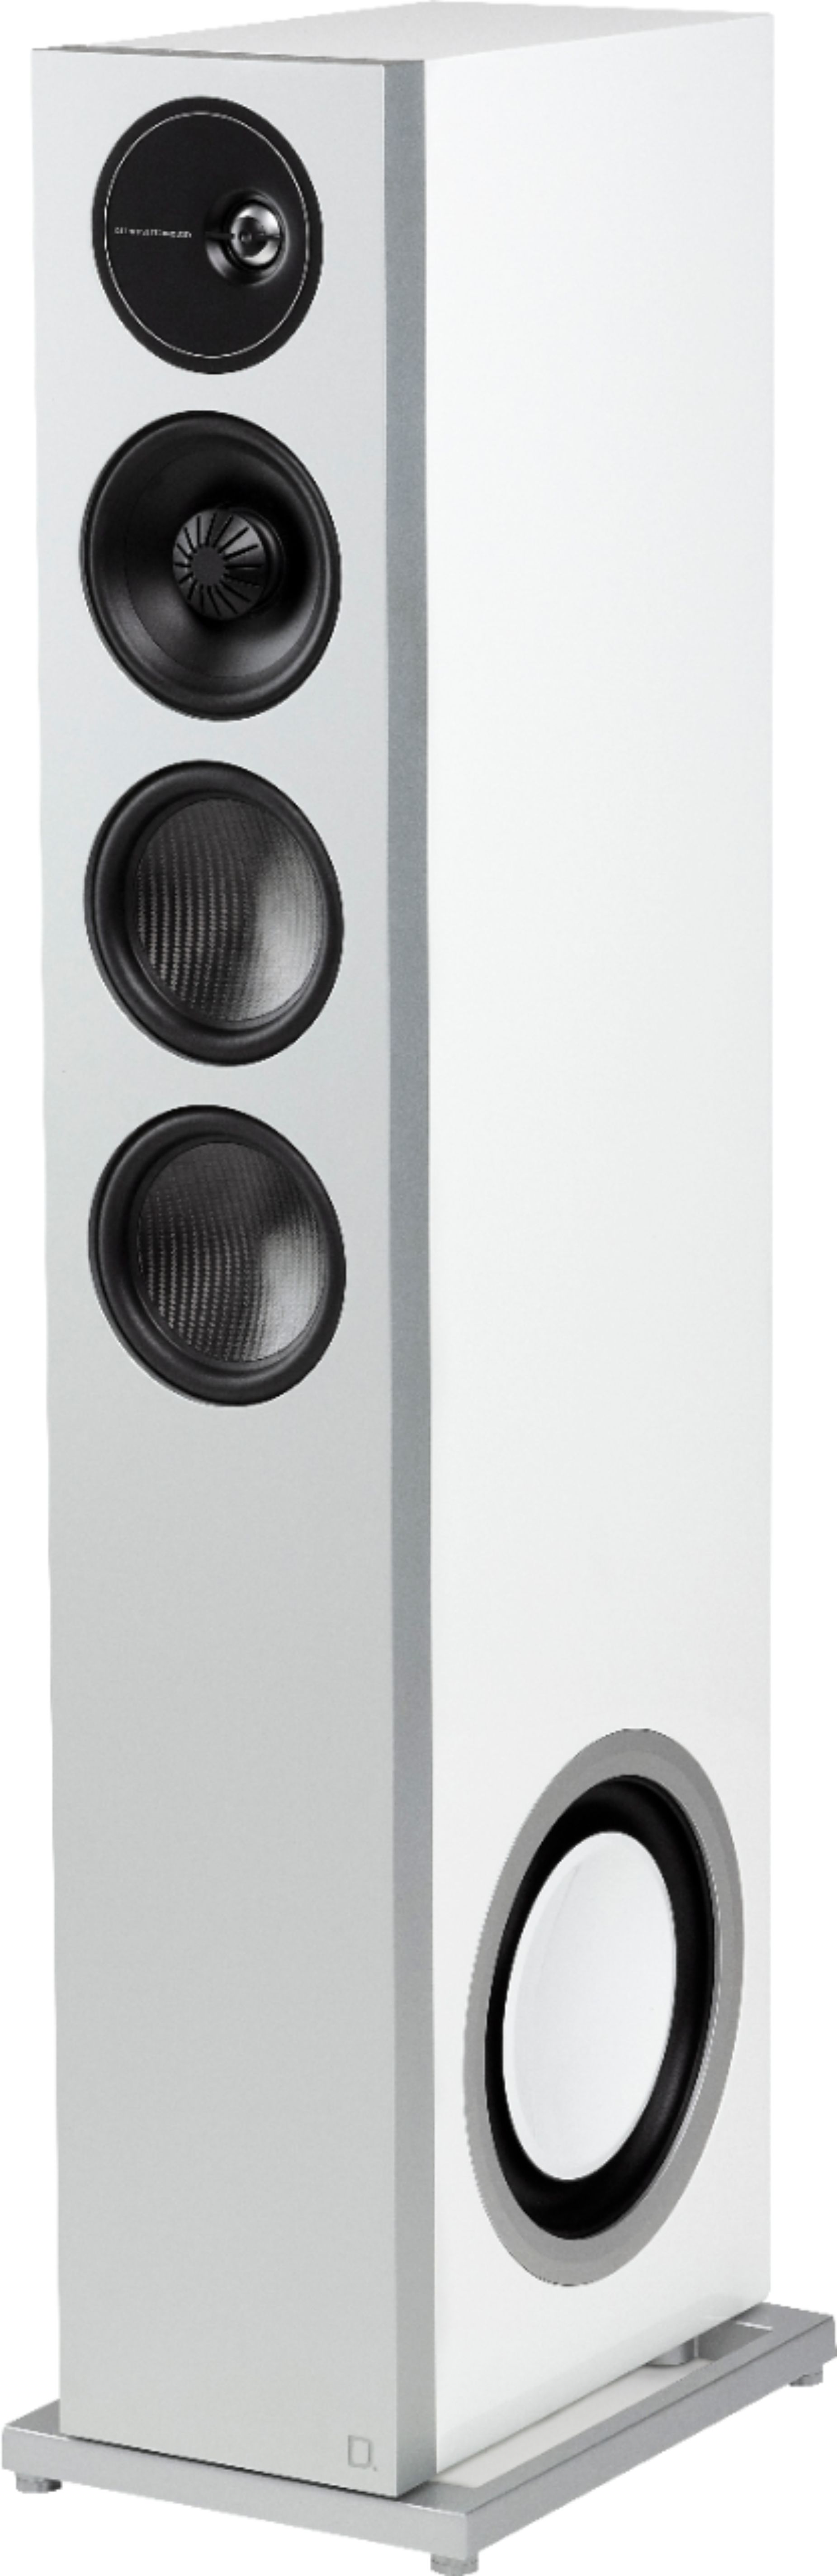 Left View: Definitive Technology - Demand D17 3-Way Tower Speaker (Right-Channel) - Single, White, Dual 10” Passive Bass Radiators - Gloss White